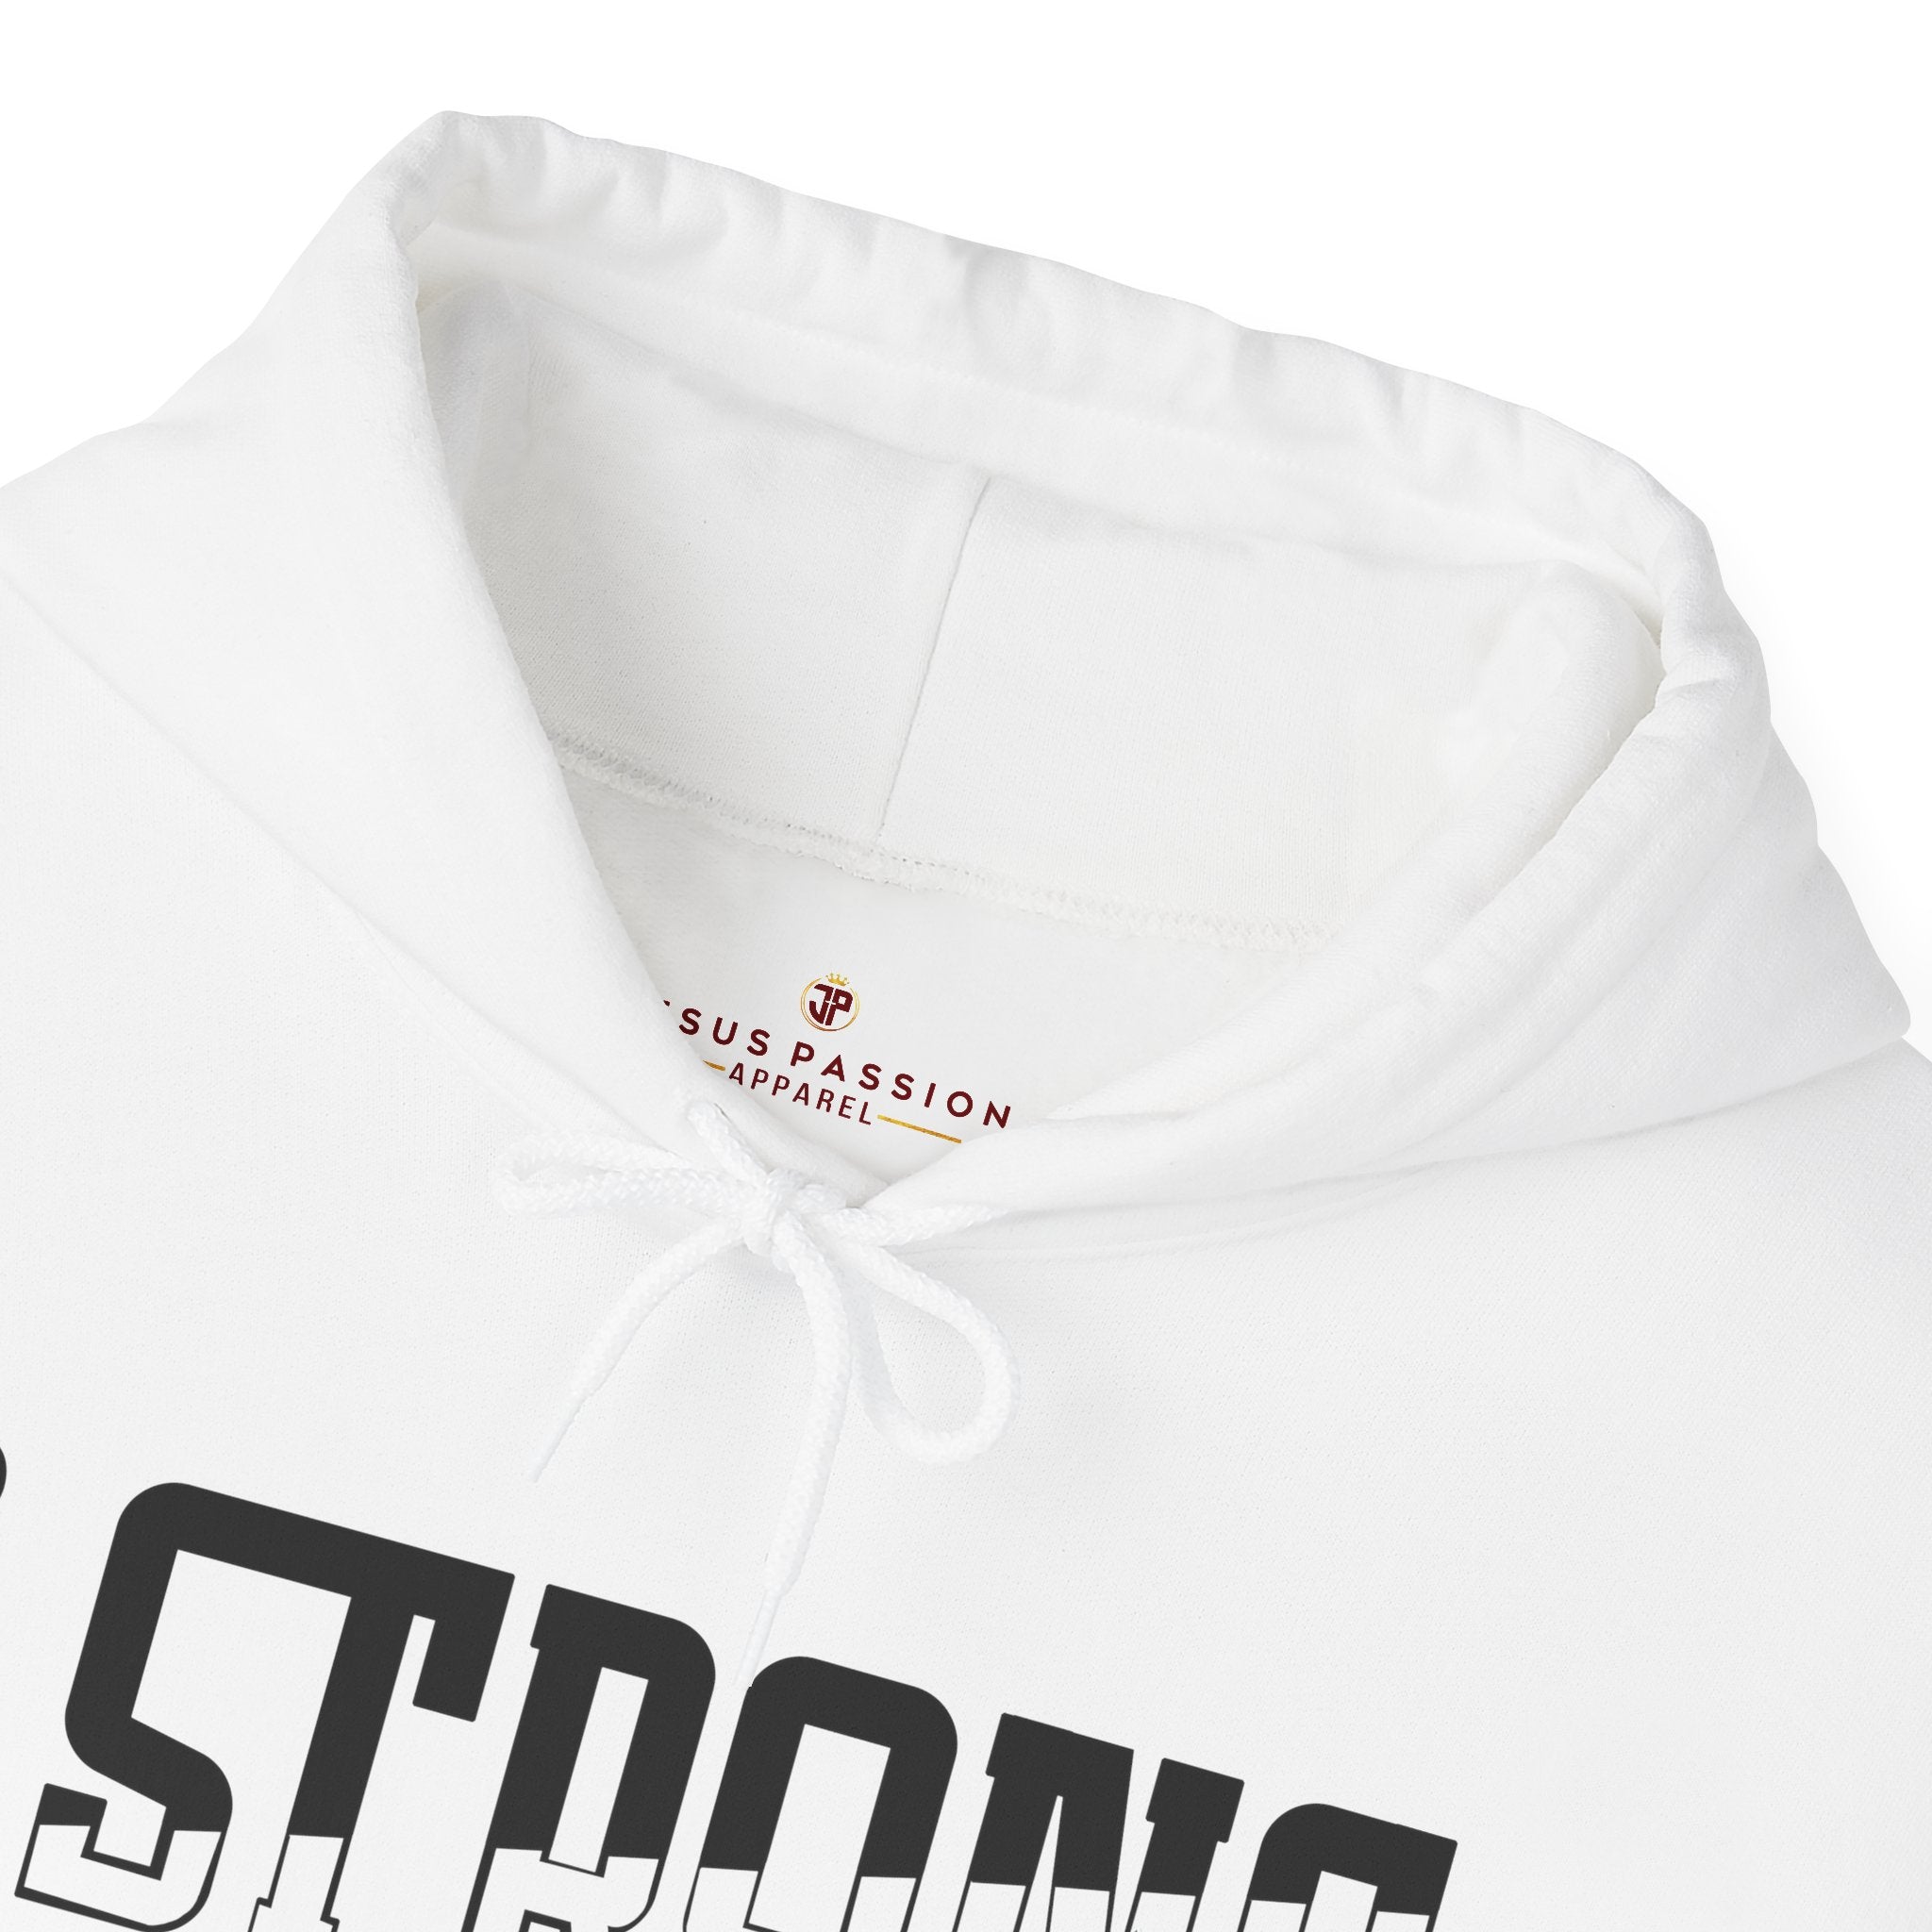 Be Strong and Courageous Men's Heavy Blend™ Hoodie Color: White Size: S Jesus Passion Apparel